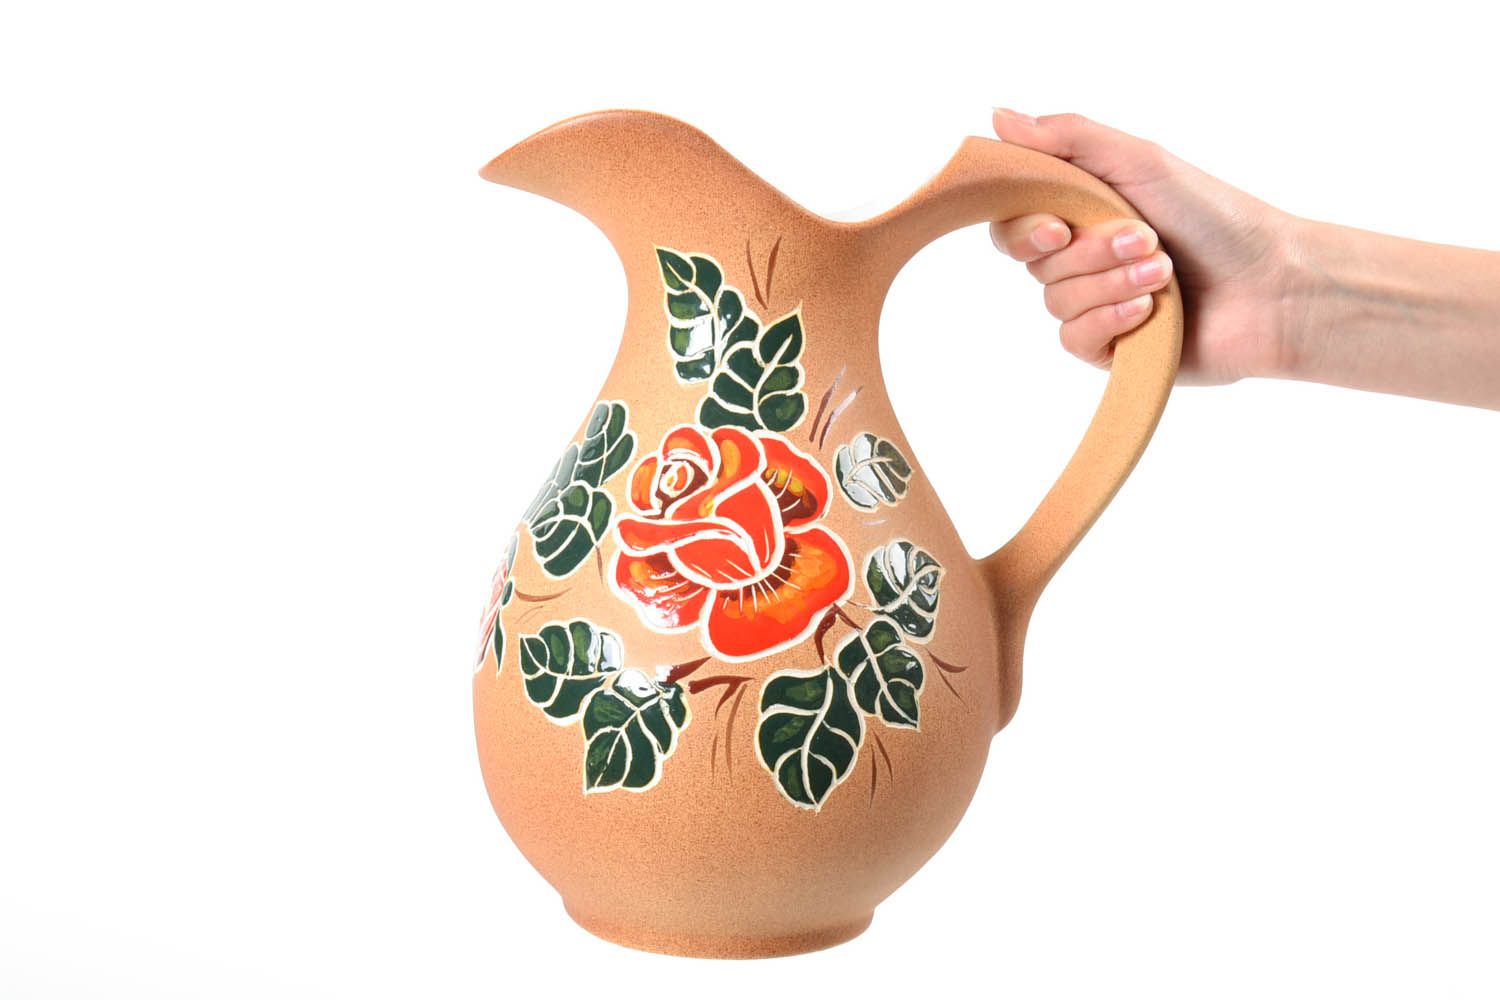 100 oz ceramic water jug with handle and floral design in beige color 4 lb photo 2